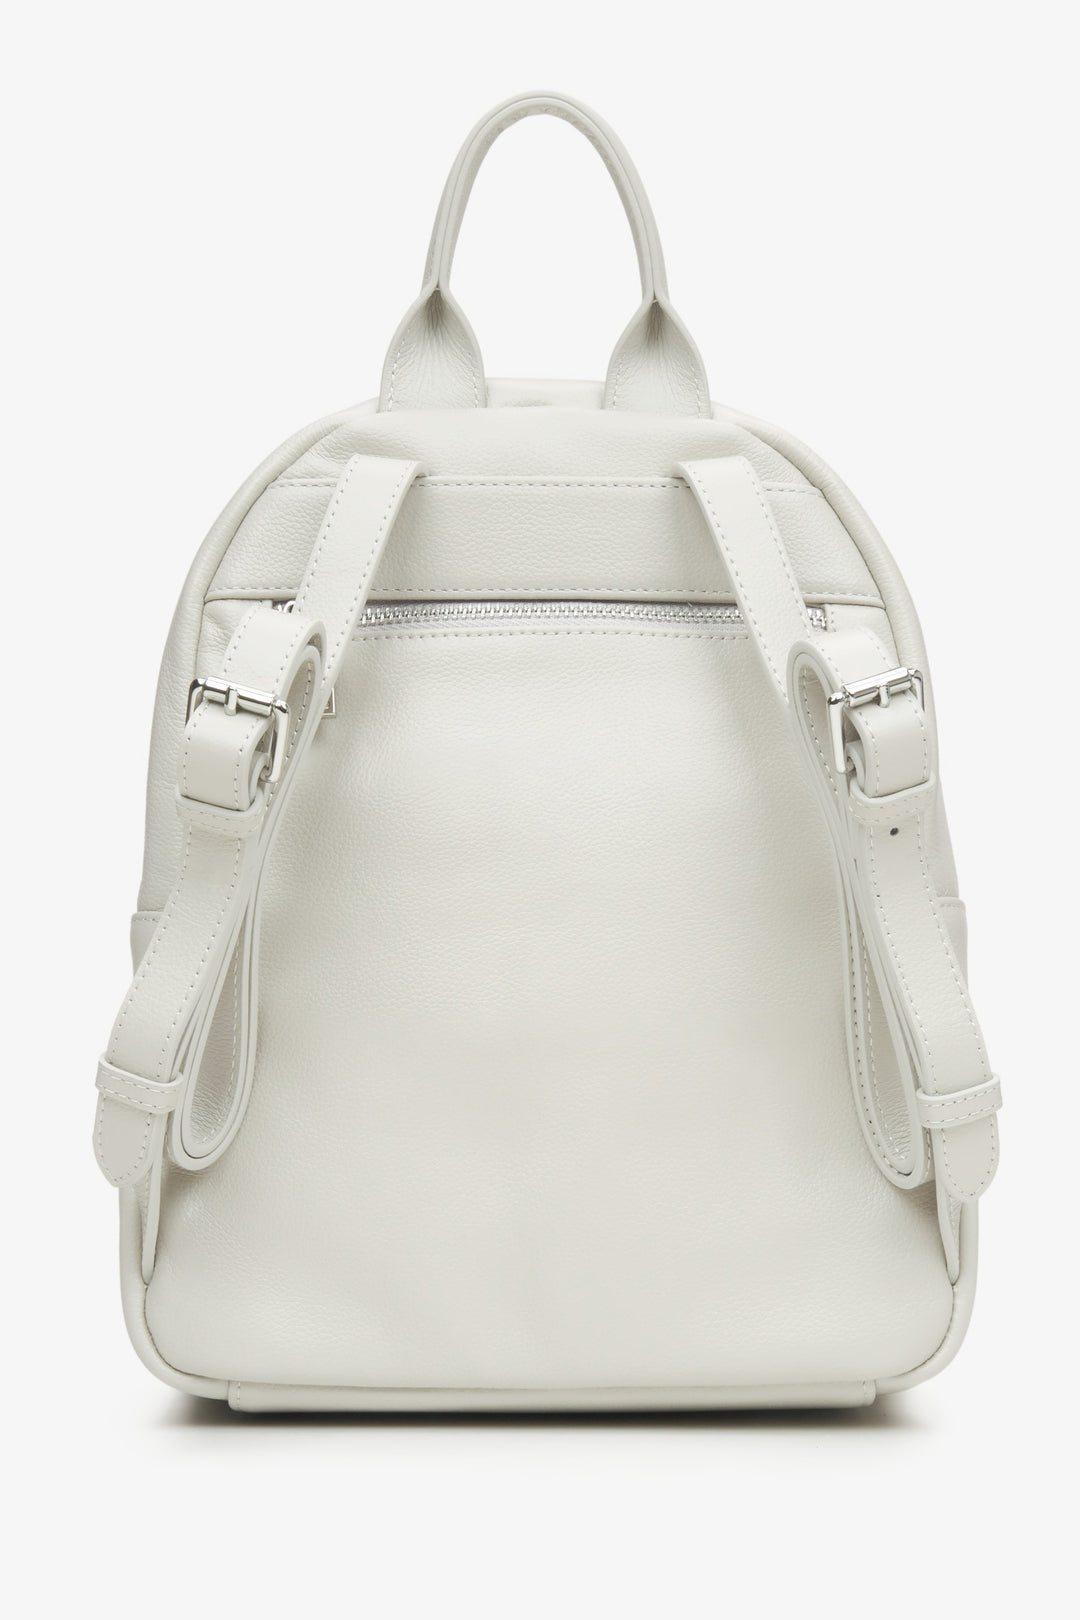 Women's light grey leather backpack with long straps by Estro - back view.